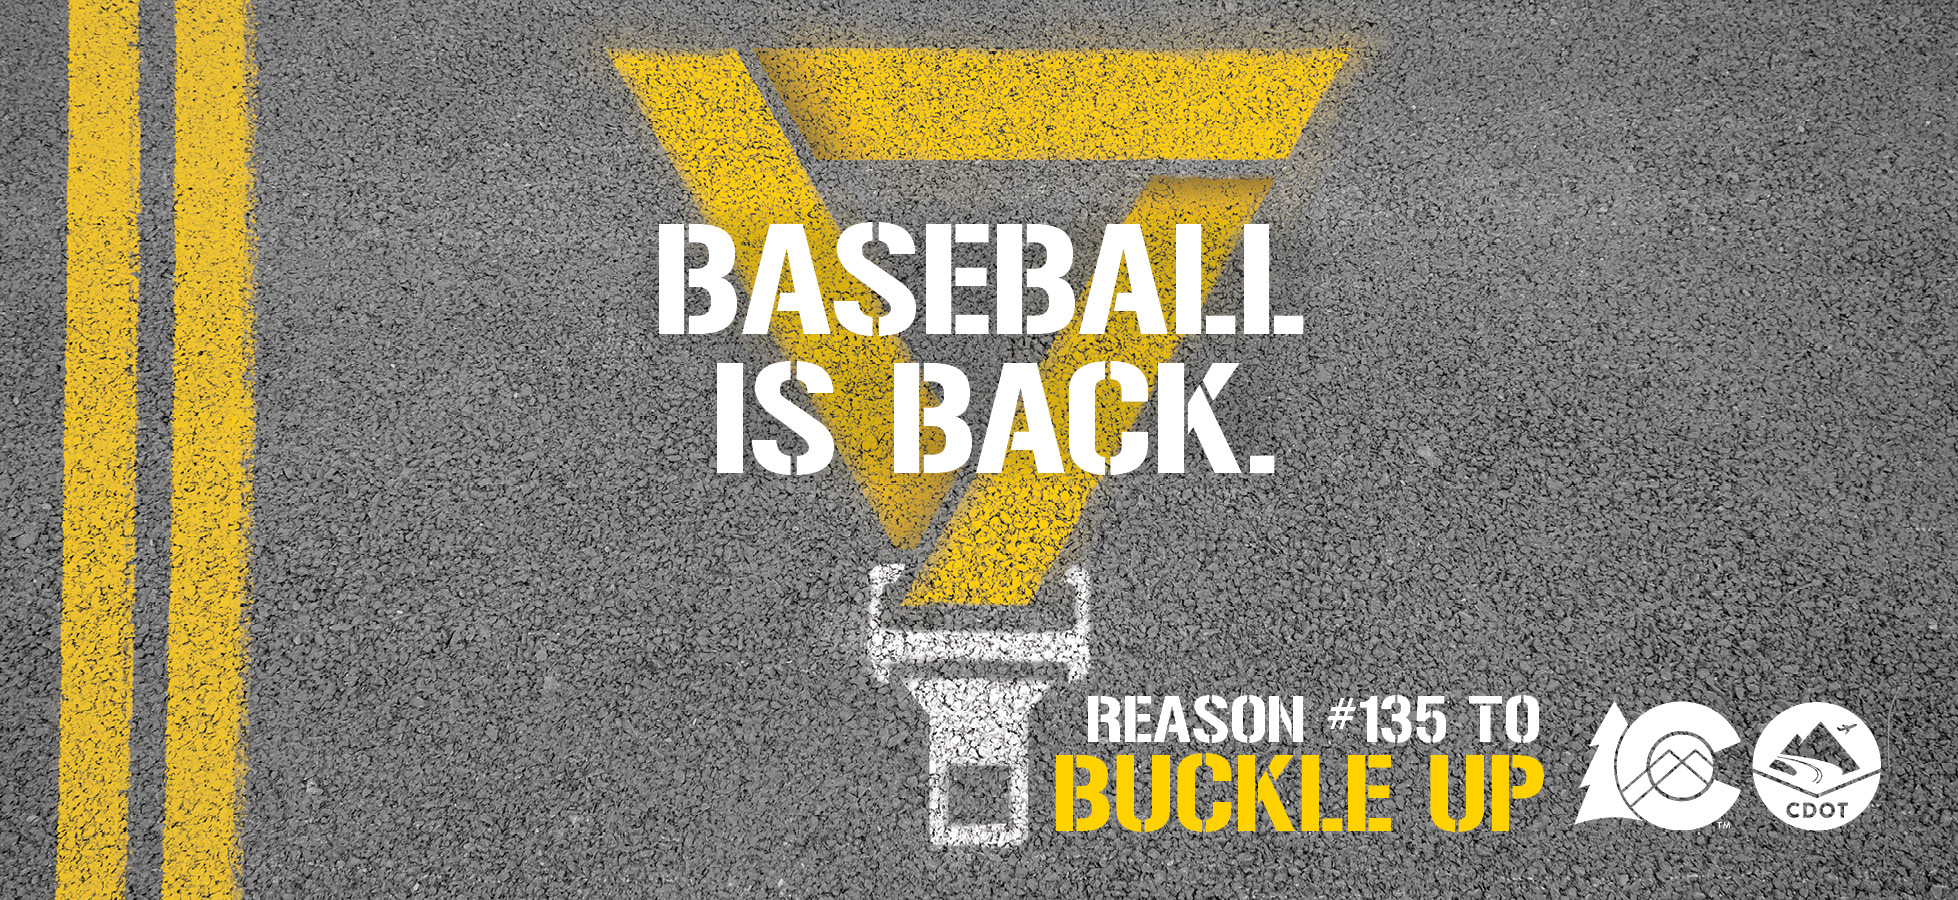 Reason 135 to Buckle Up - Baseball is Back graphic detail image